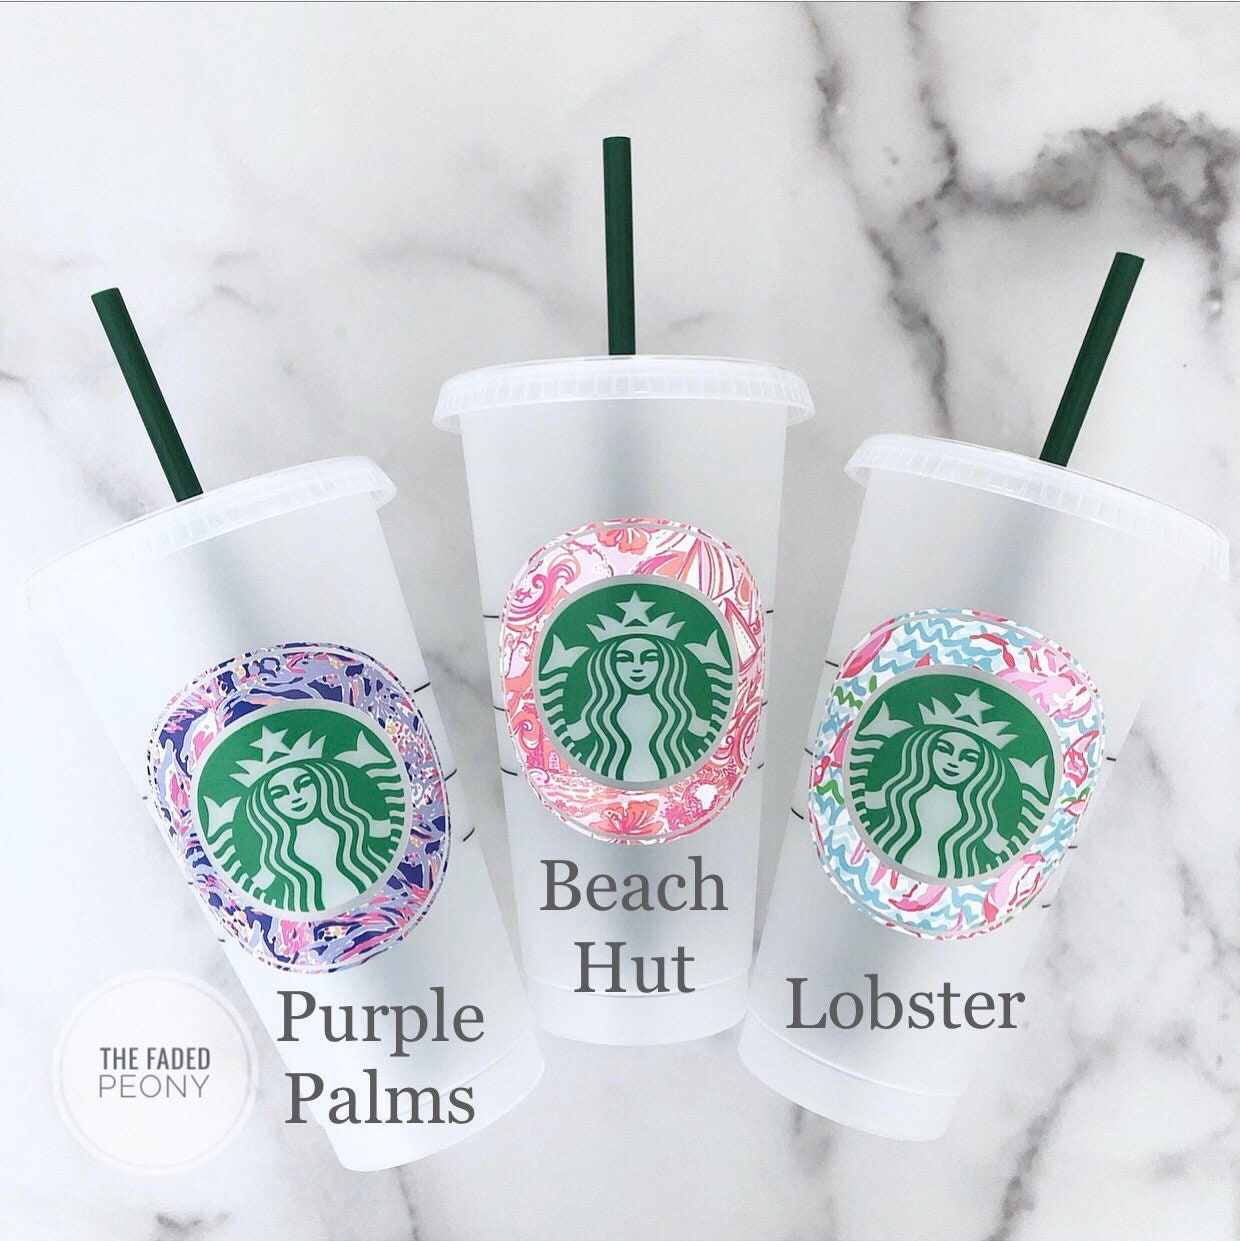 DIY Customized Starbucks Cups - Personalize With a Name! - Jennifer Maker